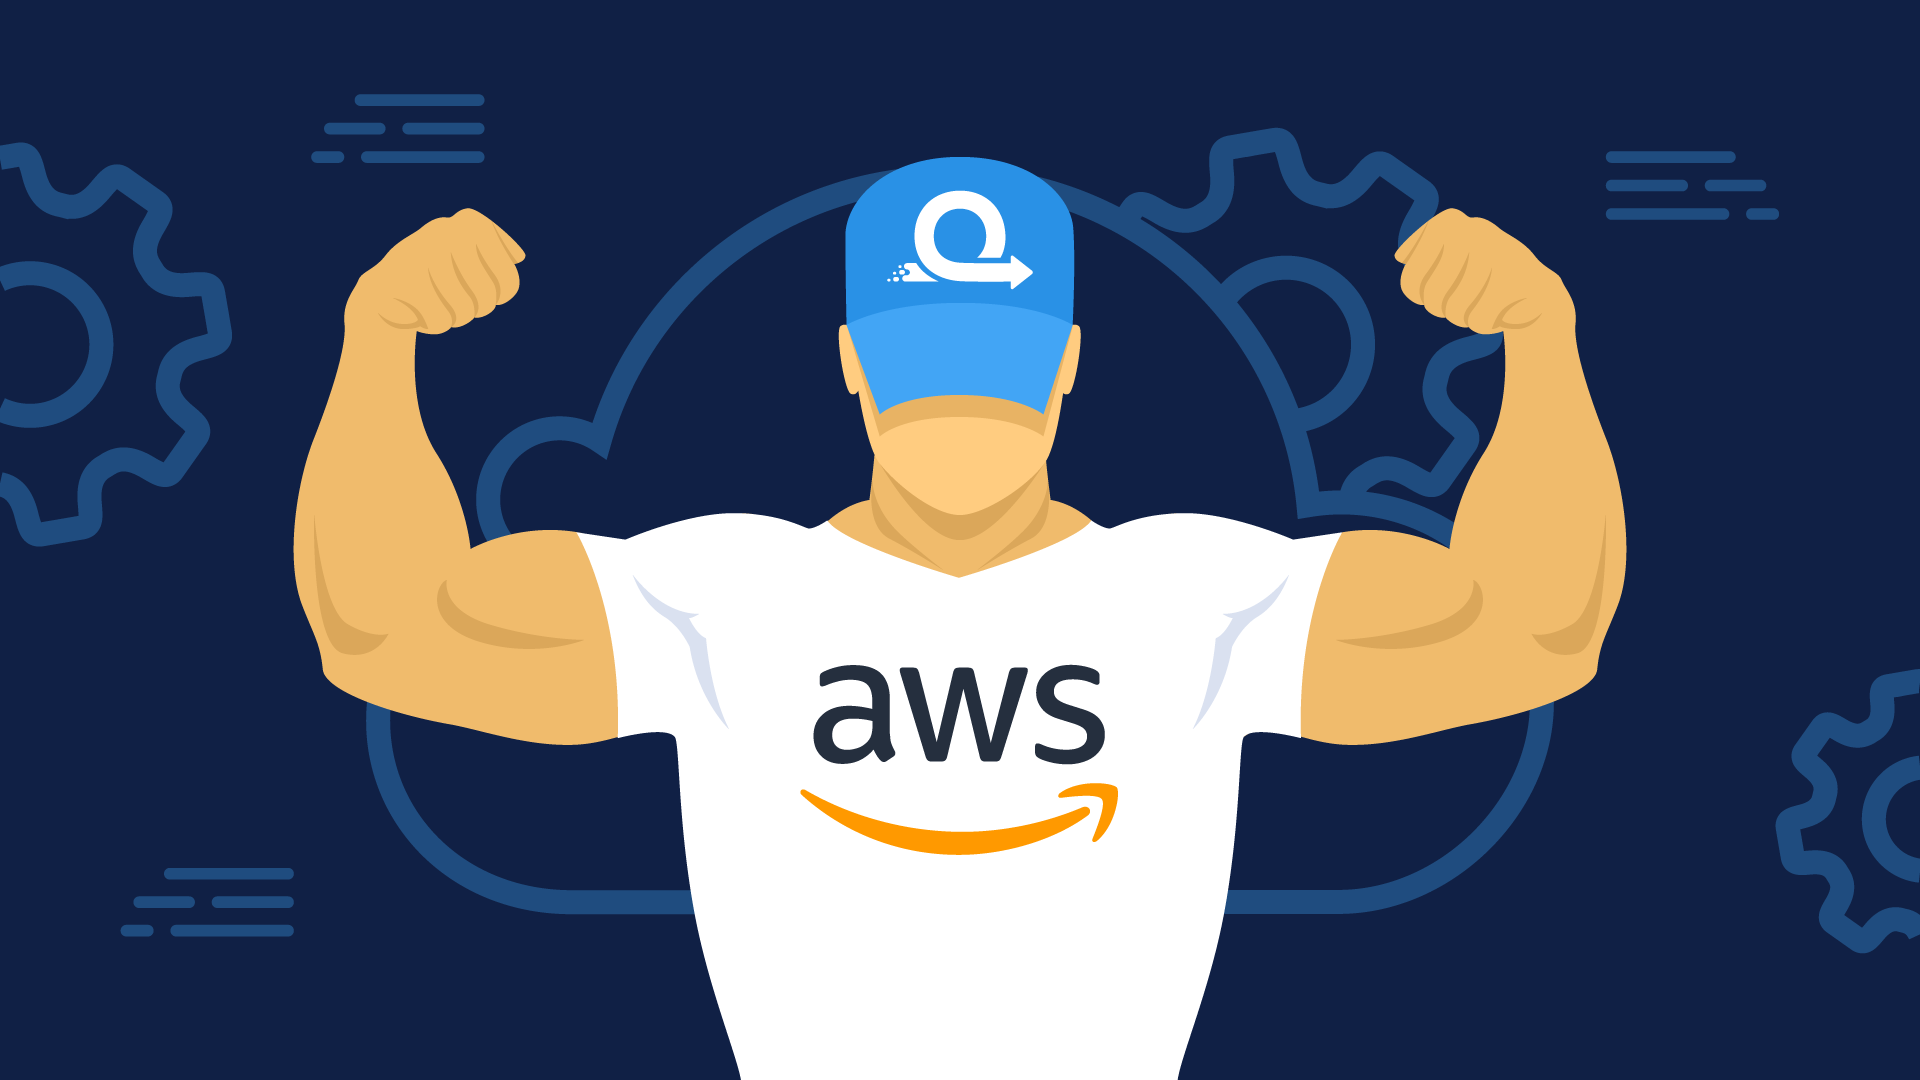 AgileVision confirms its status as the AWS Partner